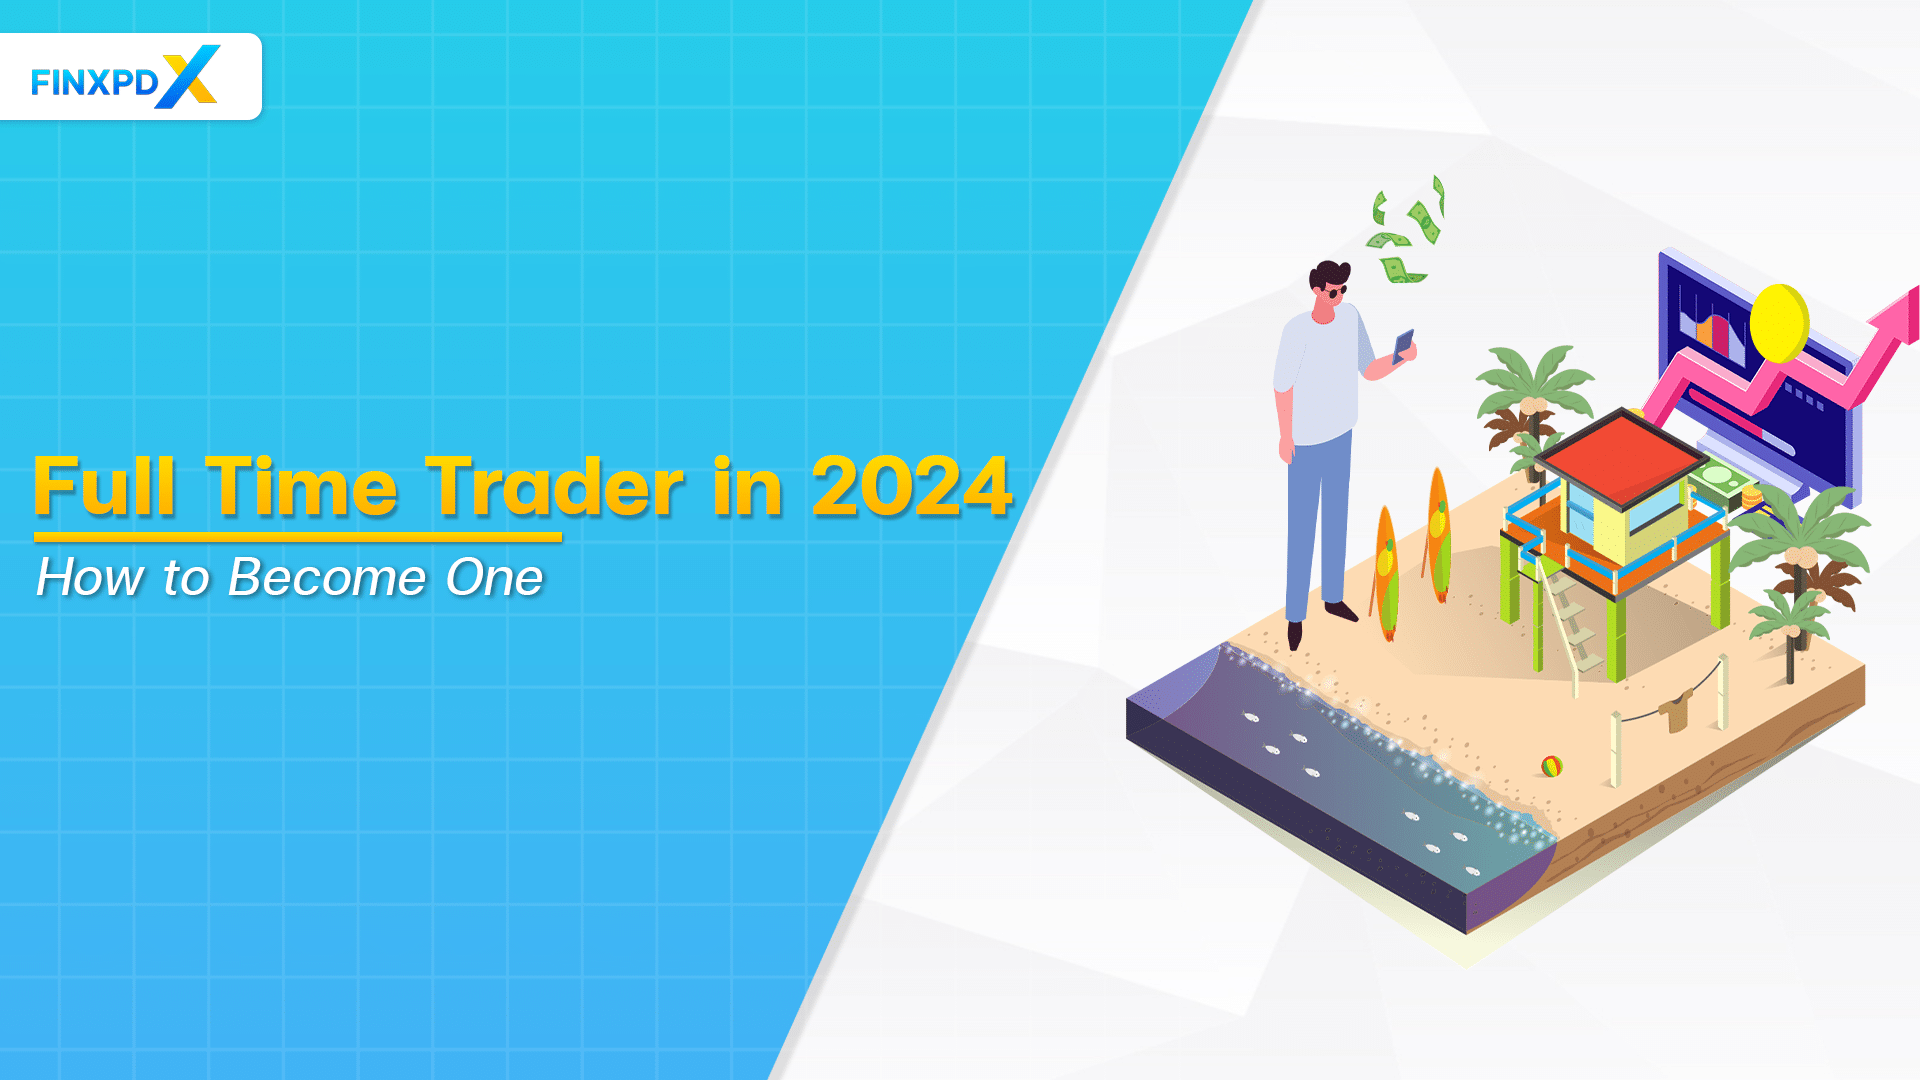 How to Be a Full Time Trader in 2024